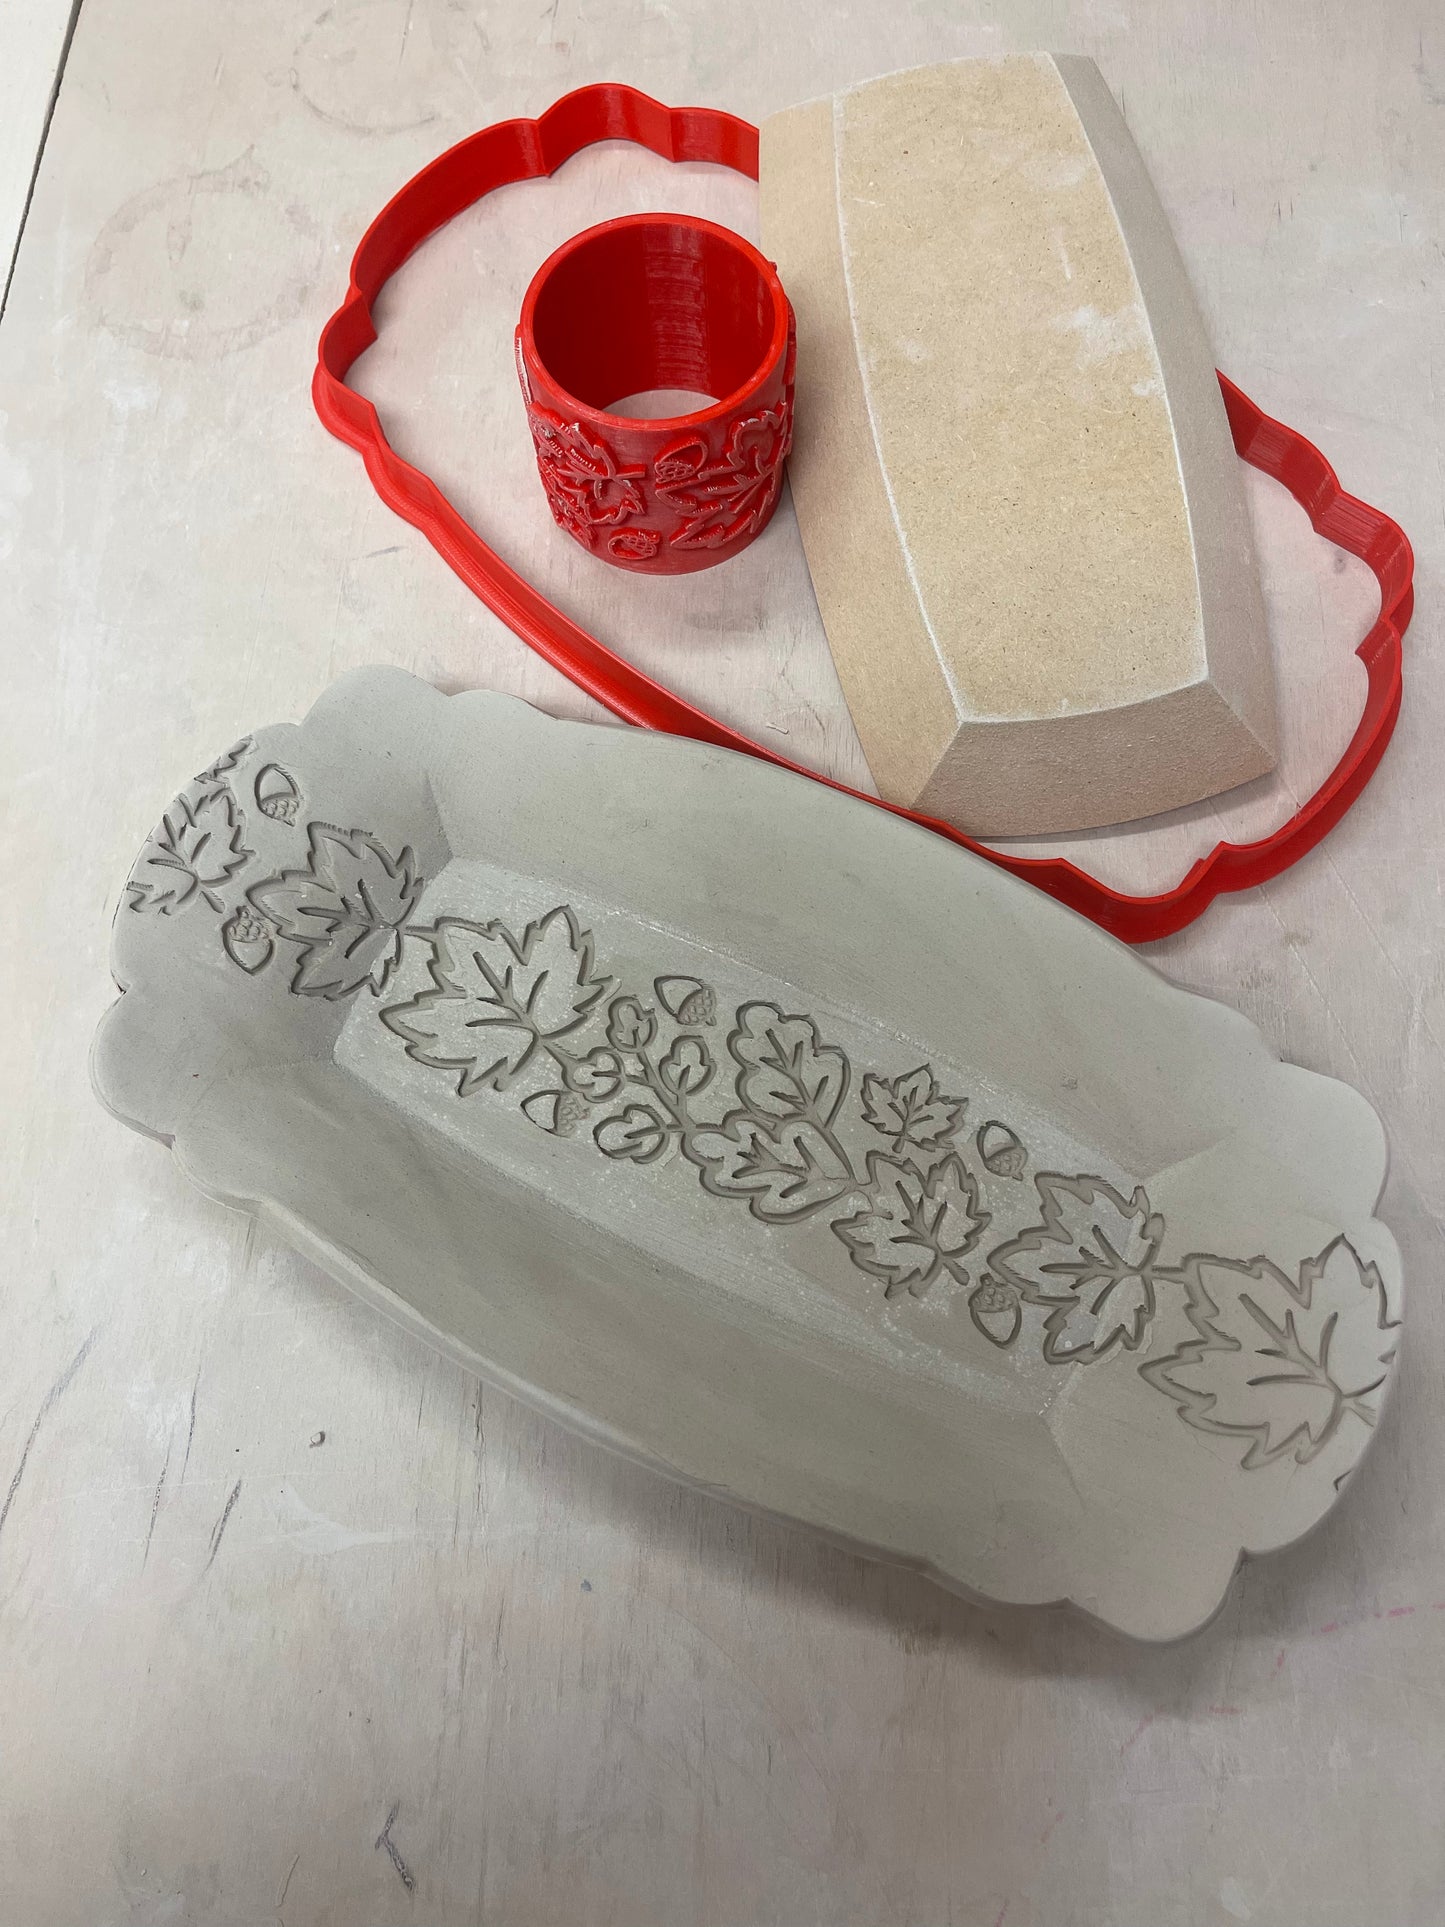 Fall Leaves Pottery Roller - Border Stamp, Repeating pattern, 2 sizes, Plastic 3d printed